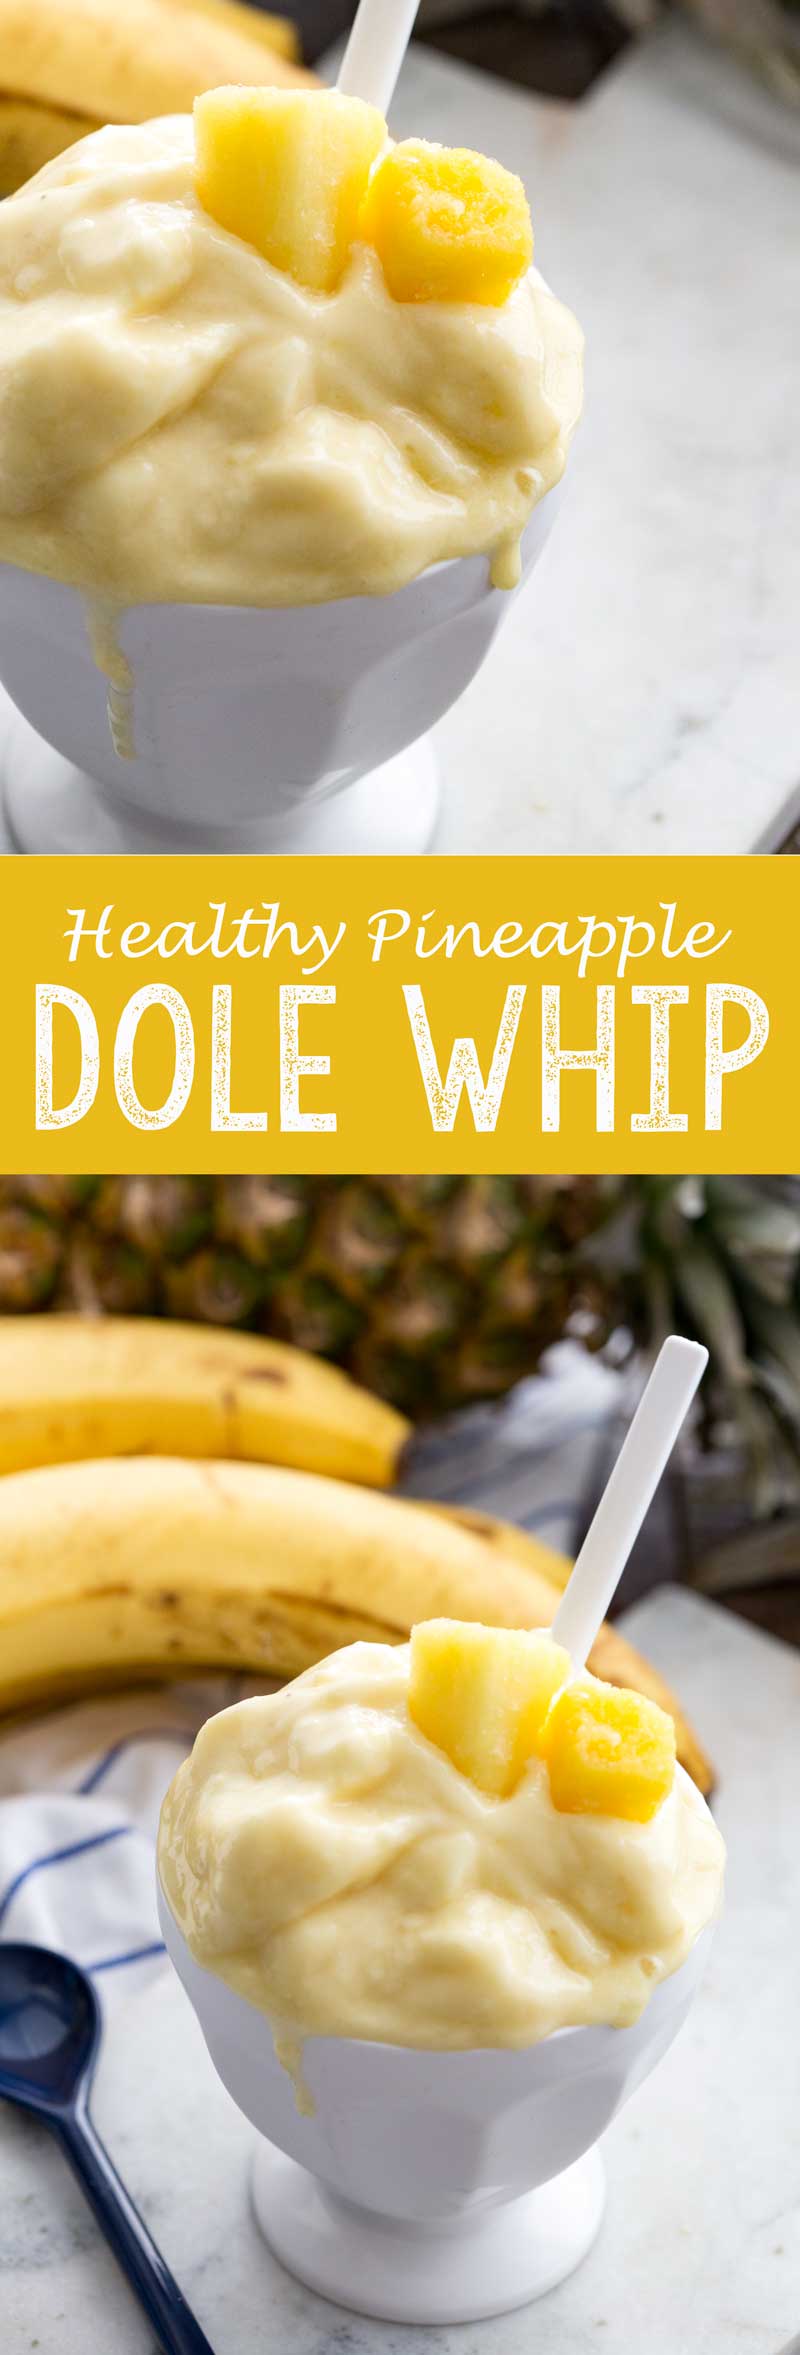 Healthy Pineapple Dole Whip made from all fruit, juice, and more! Added protein makes it a great healthy snack idea. 